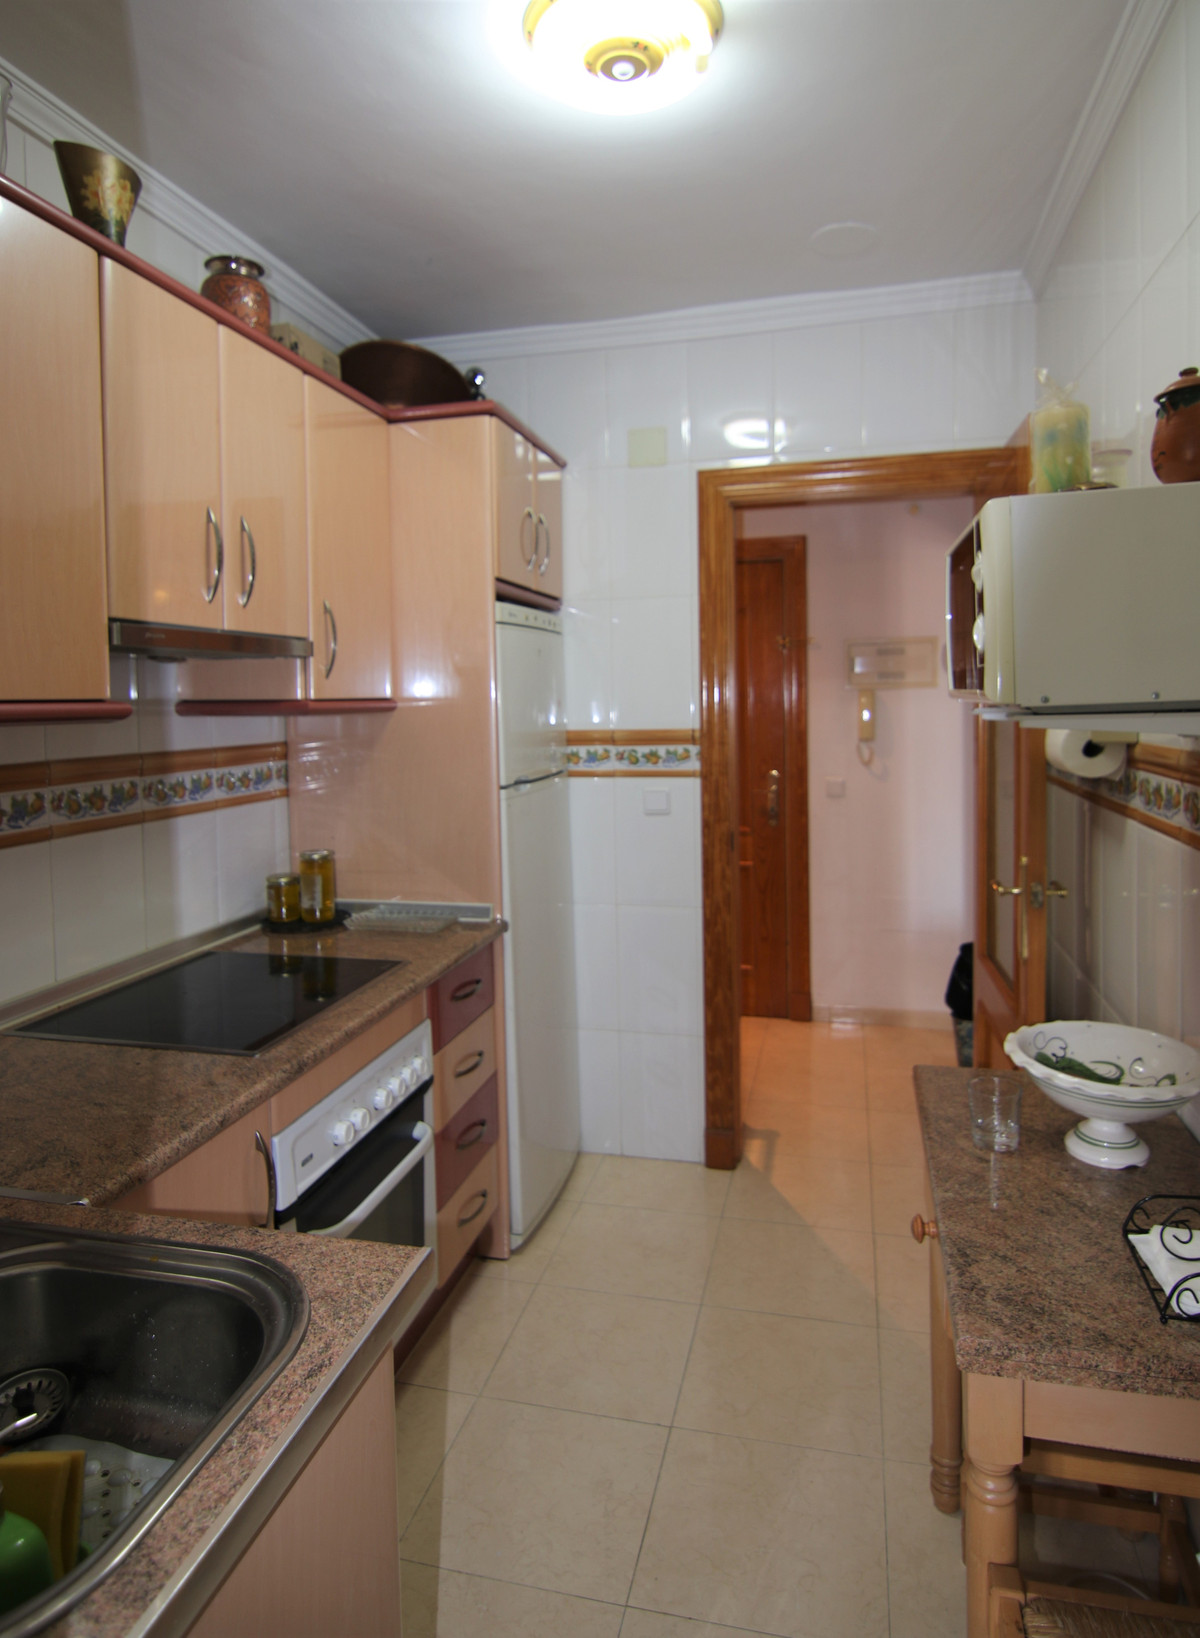 BEAUTIFUL GROUND FLOOR APARTMENT, IT IS VERY CLOSE TO  THE TOWN AND SUPERMARKETS, RESTRAUNTES.